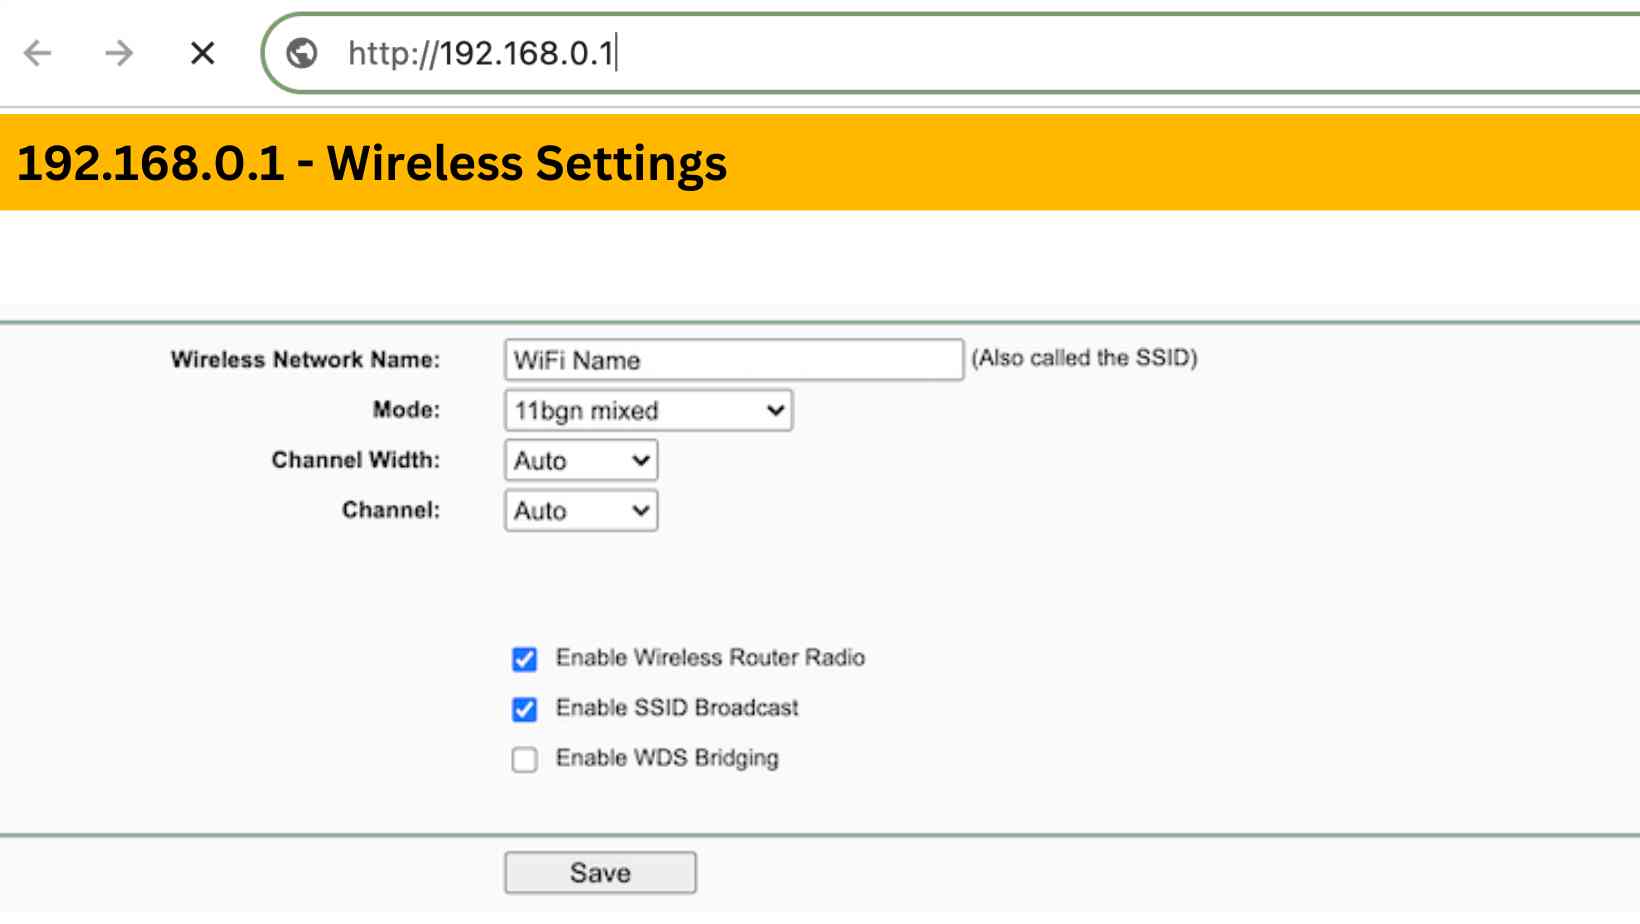 Wireless Settings page of 192.168.0.1